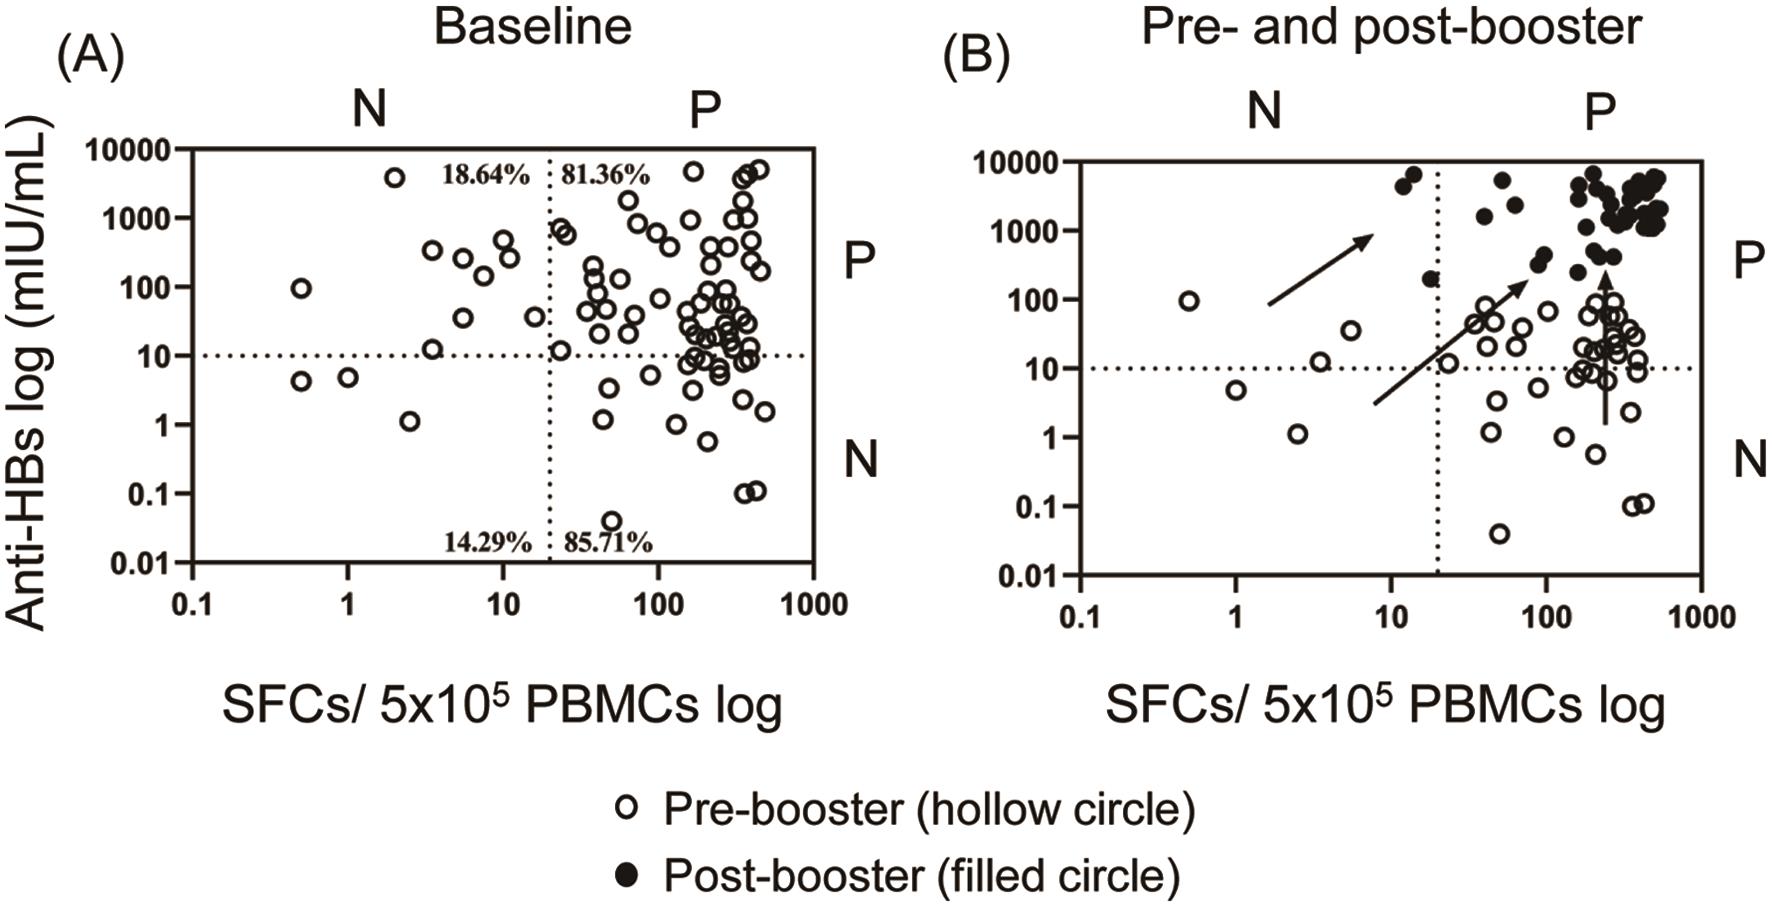 Distribution of positive and negative humoral and cellular immunity pre- and post-booster.